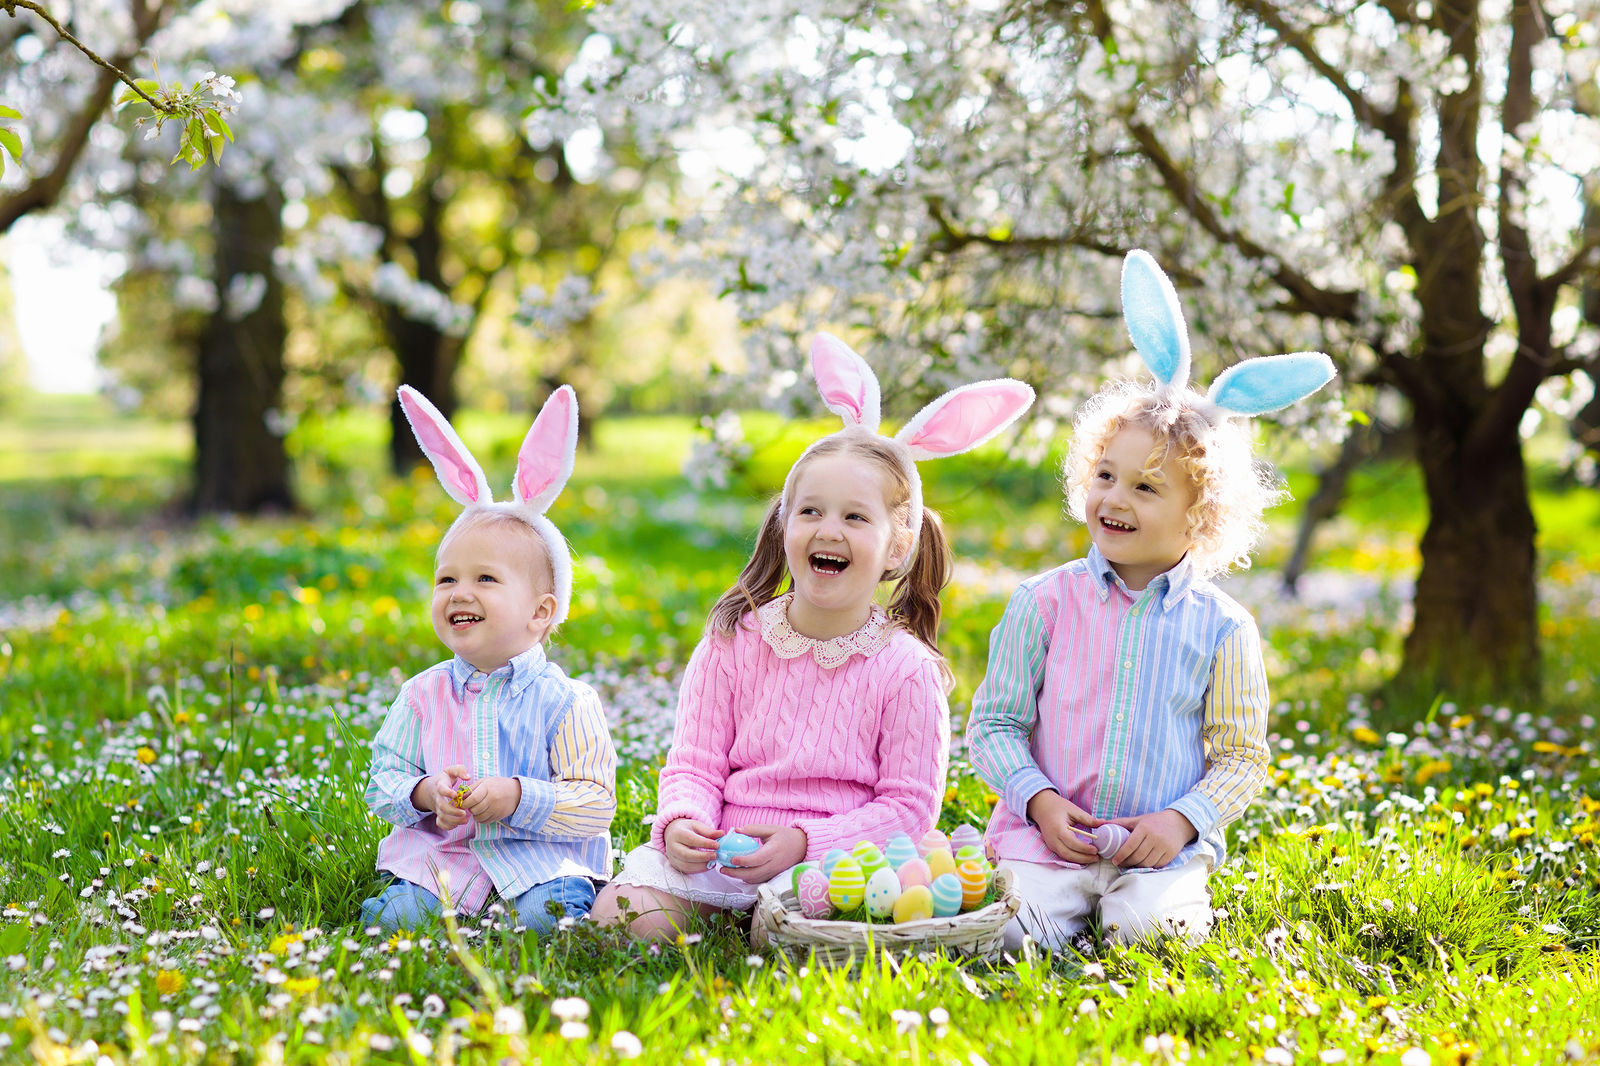 Top Events Taking Place In UK This Easter